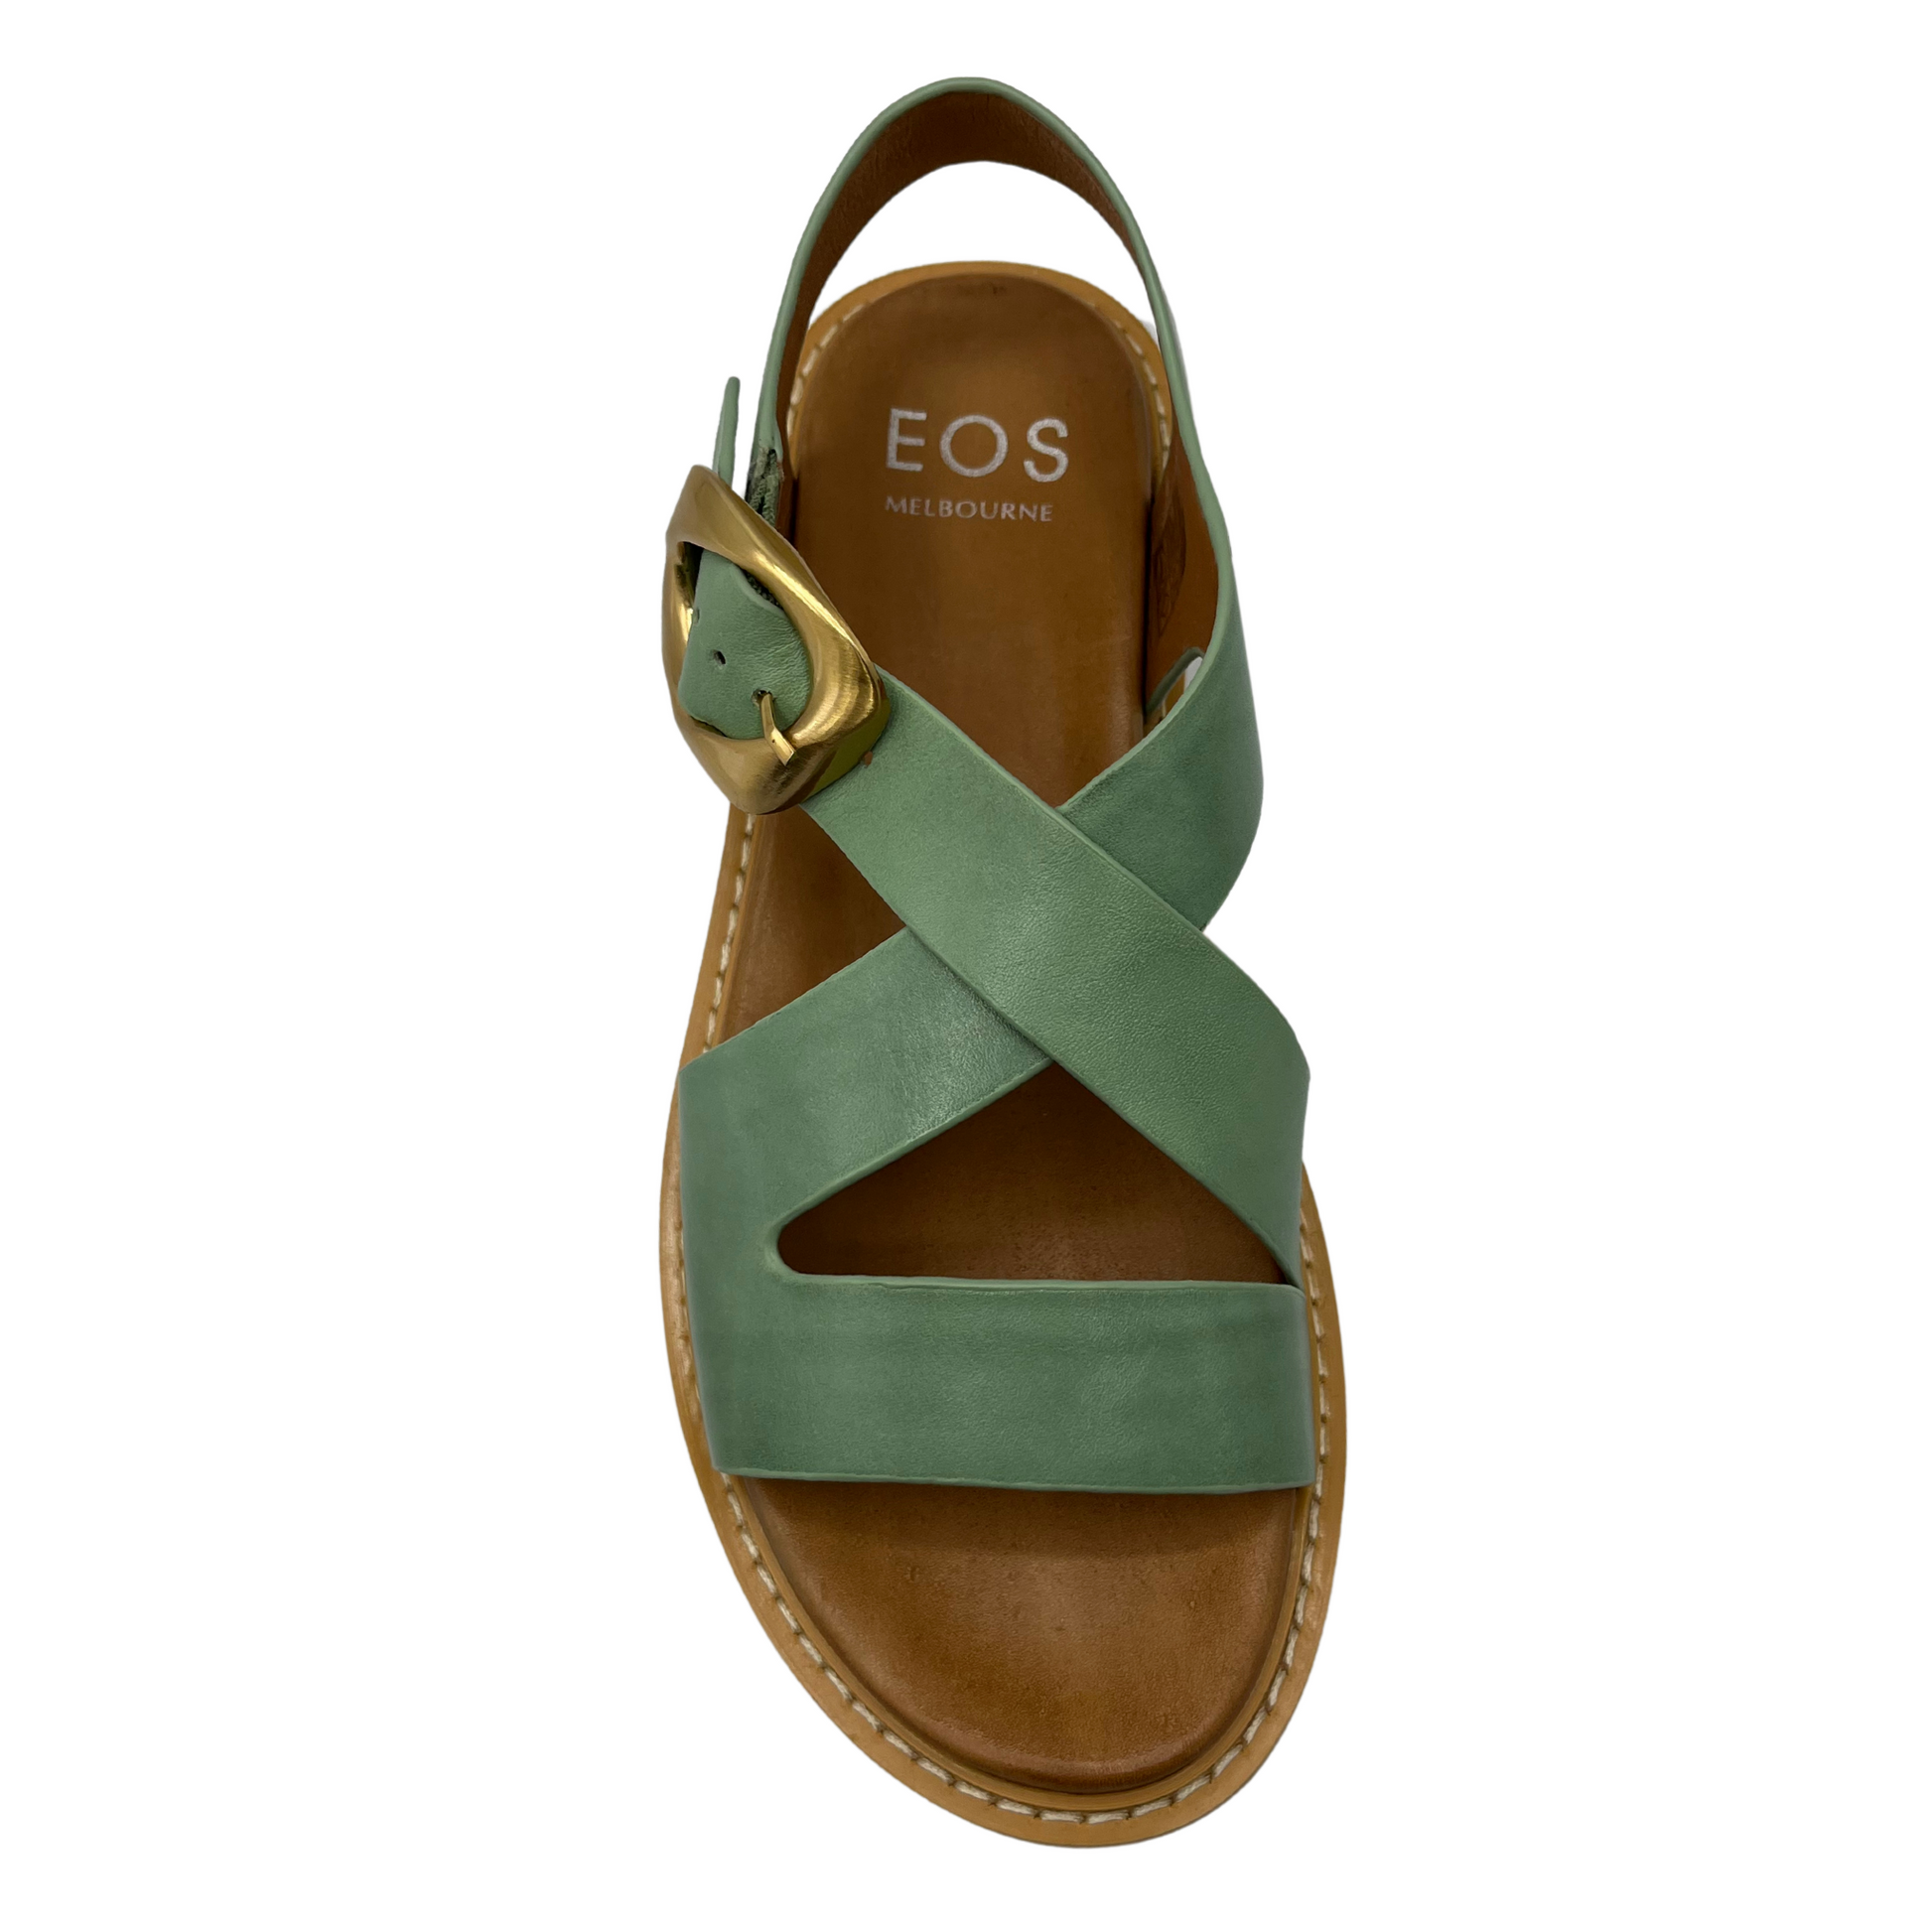 Top view of basil green leather sandal with rounded toe and gold buckle closure